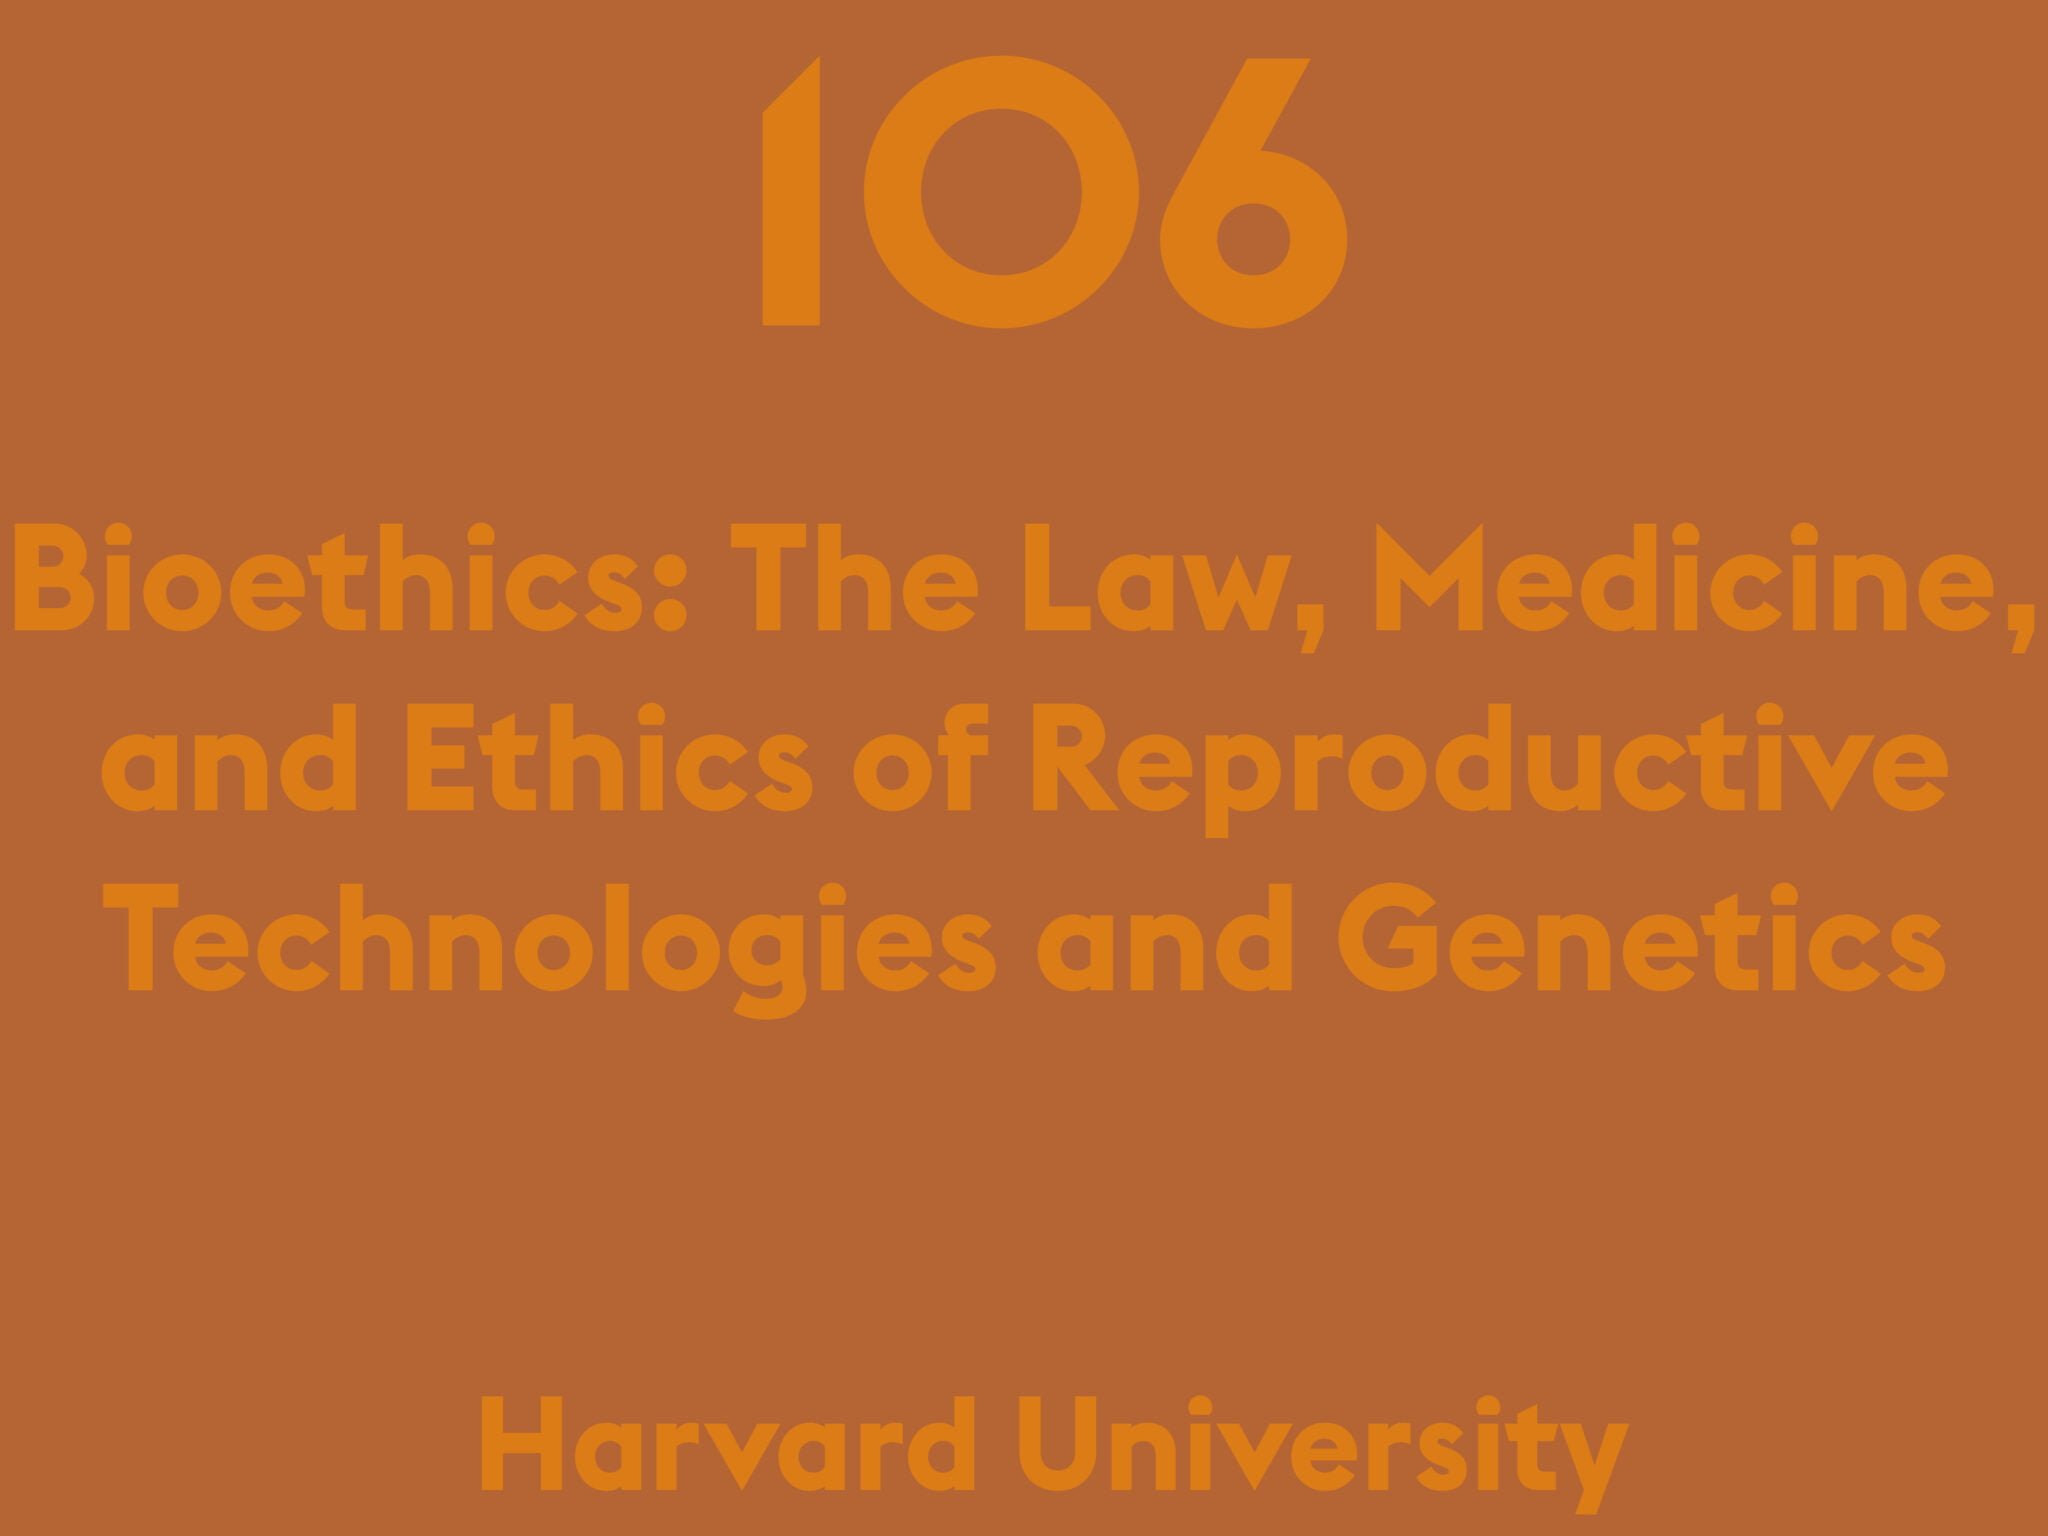 Bioethics: The Law